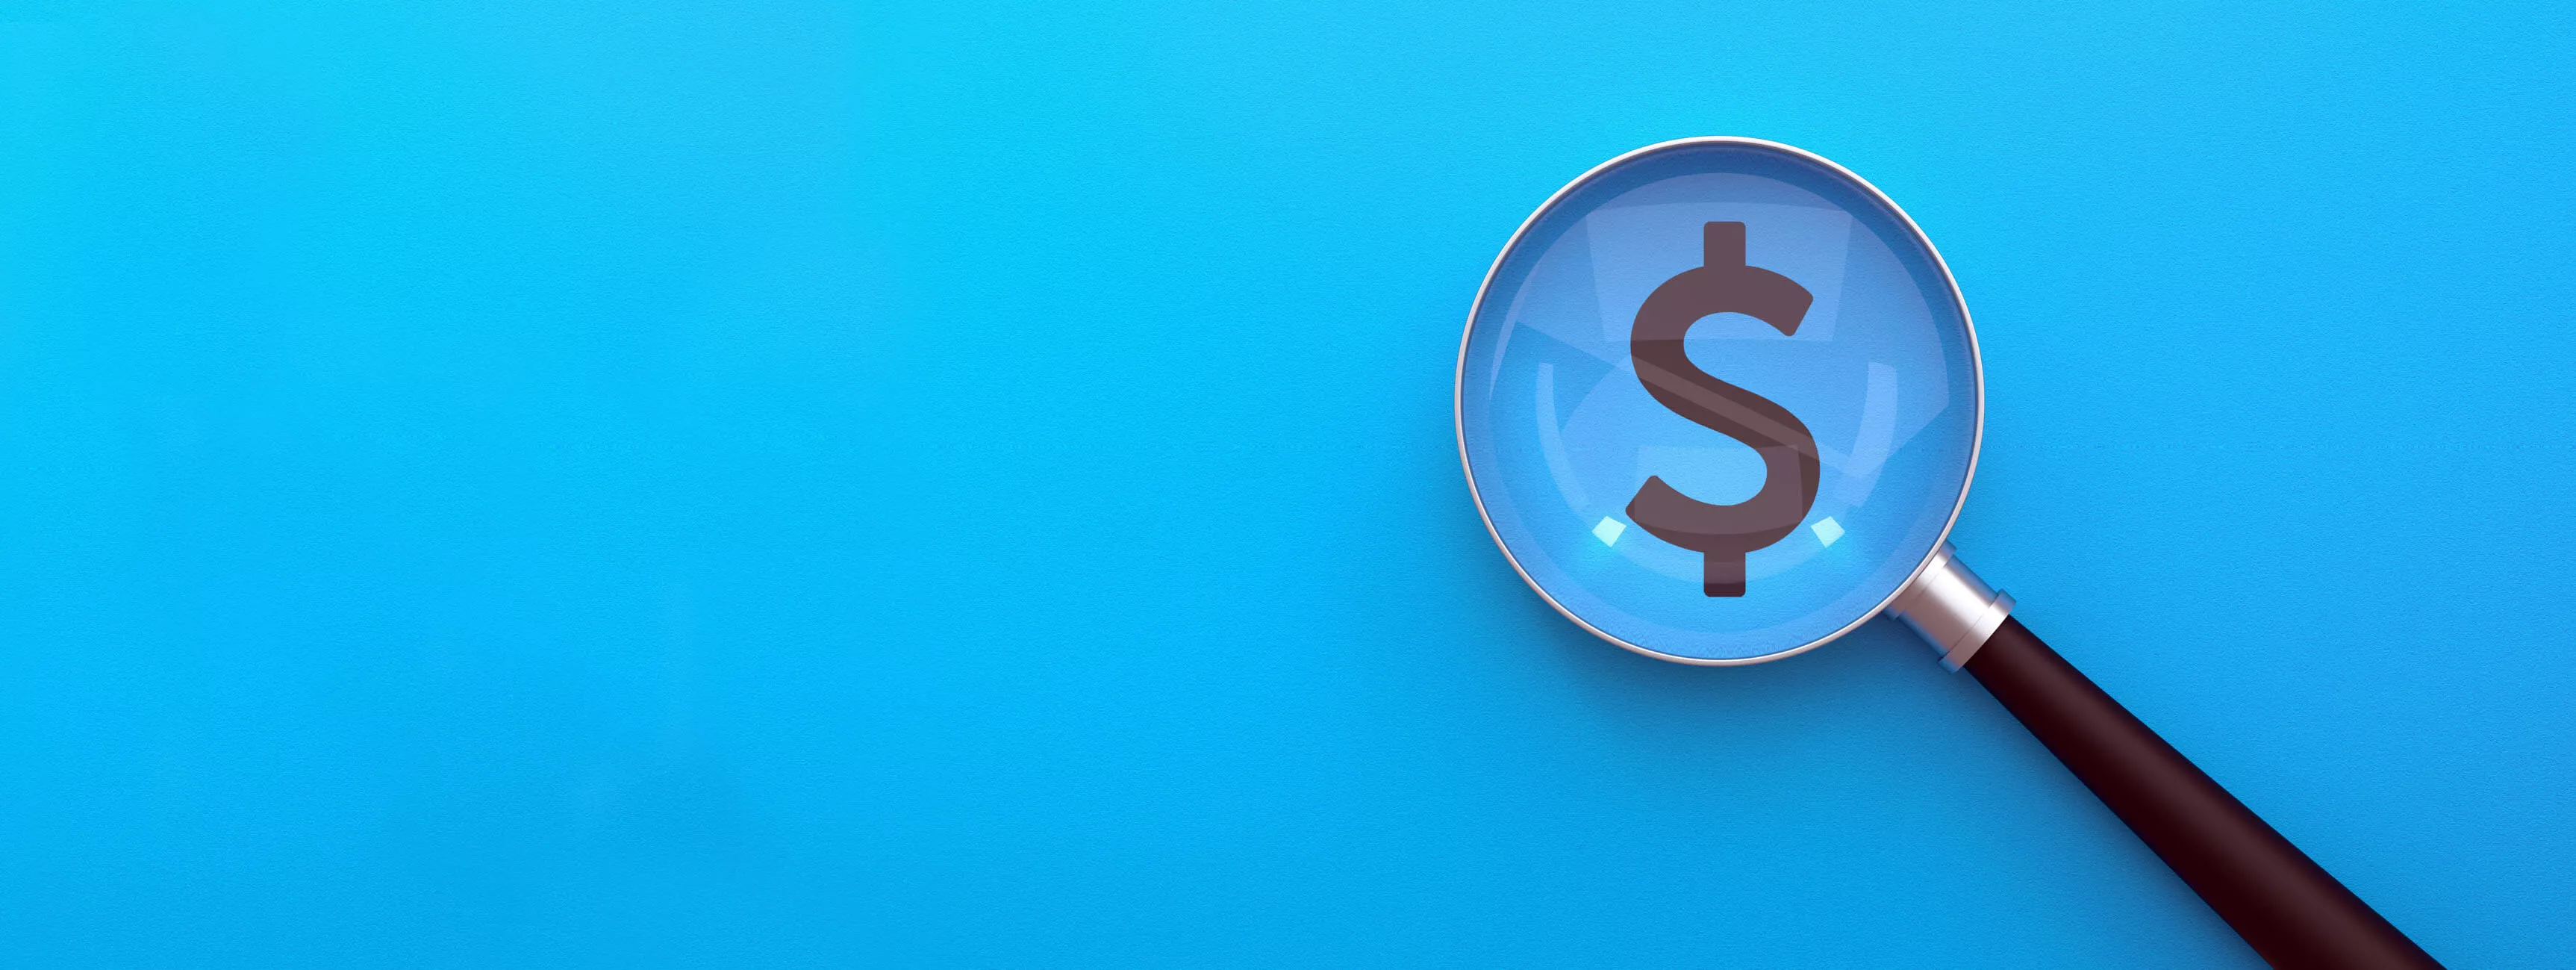 magnifying glass looking at dollar sign on blue background